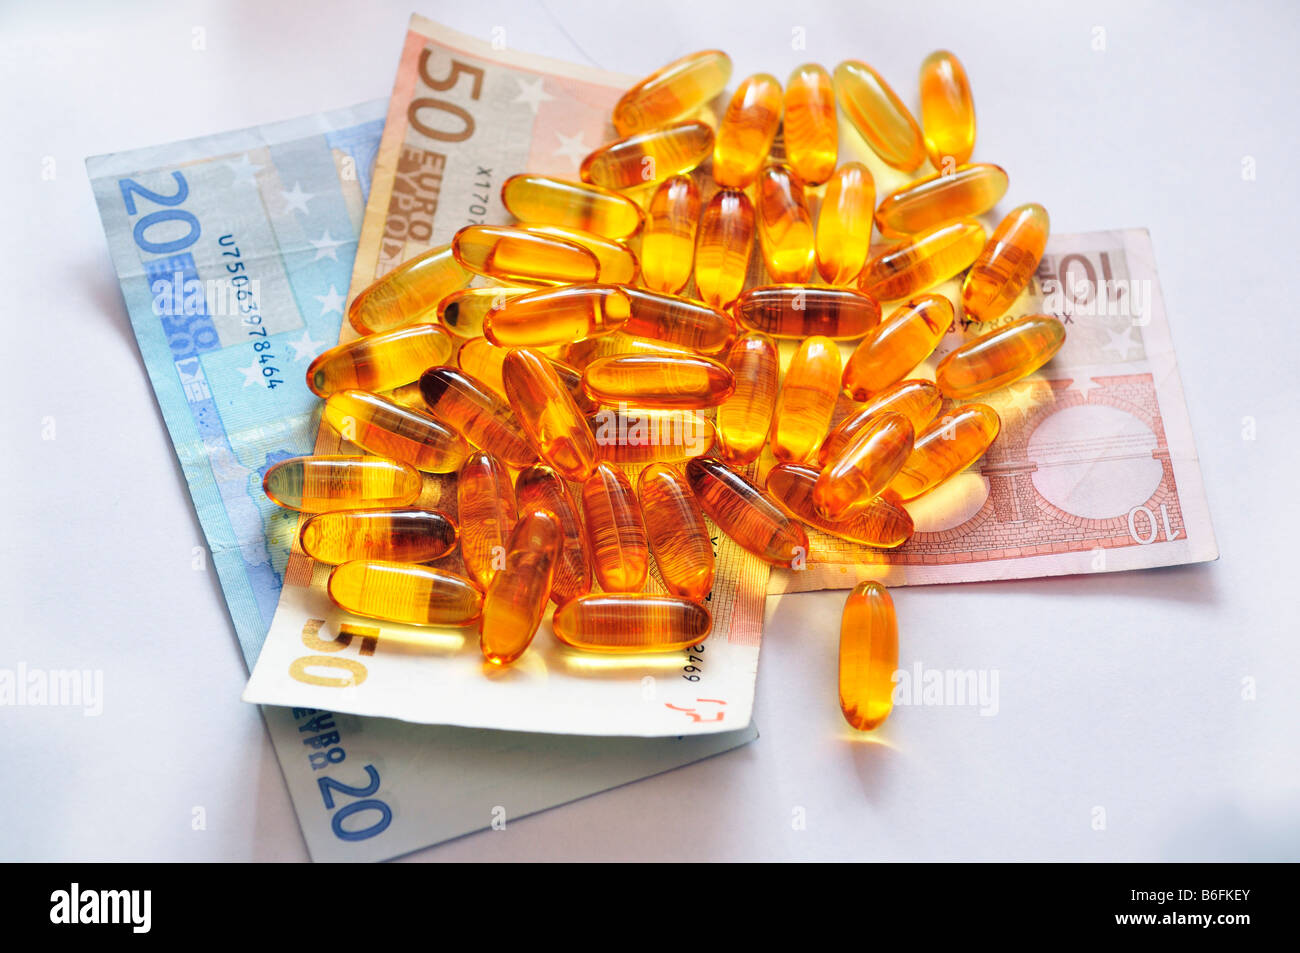 Medicine pills, capsules on bank notes Stock Photo